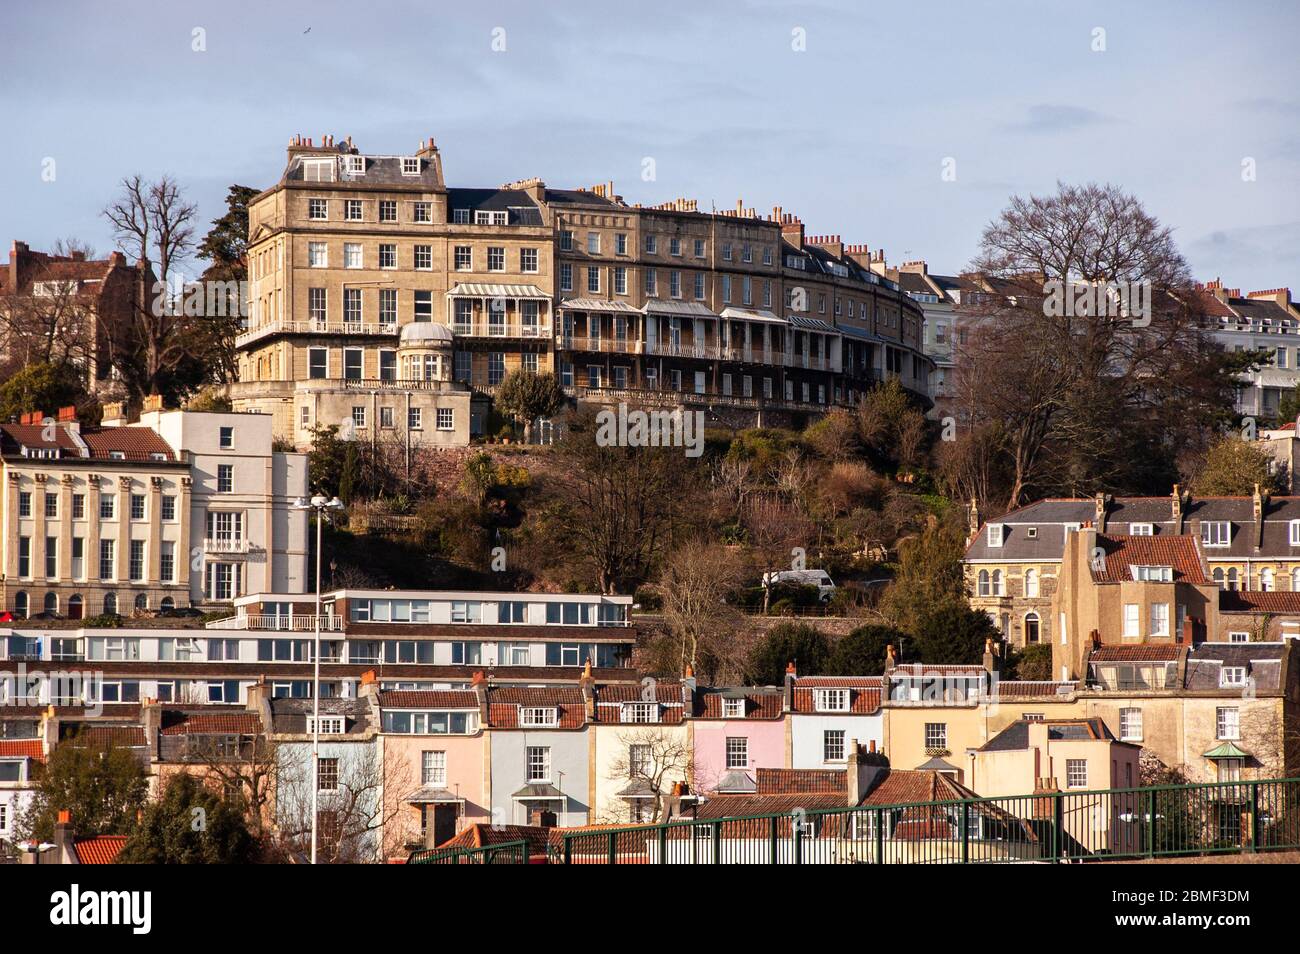 Bristol, England, UK - March 10, 2007: Georgian and Victorian town houses cover the steep hillside of Clifton Vale and the Clifton and Hotwells neighb Stock Photo